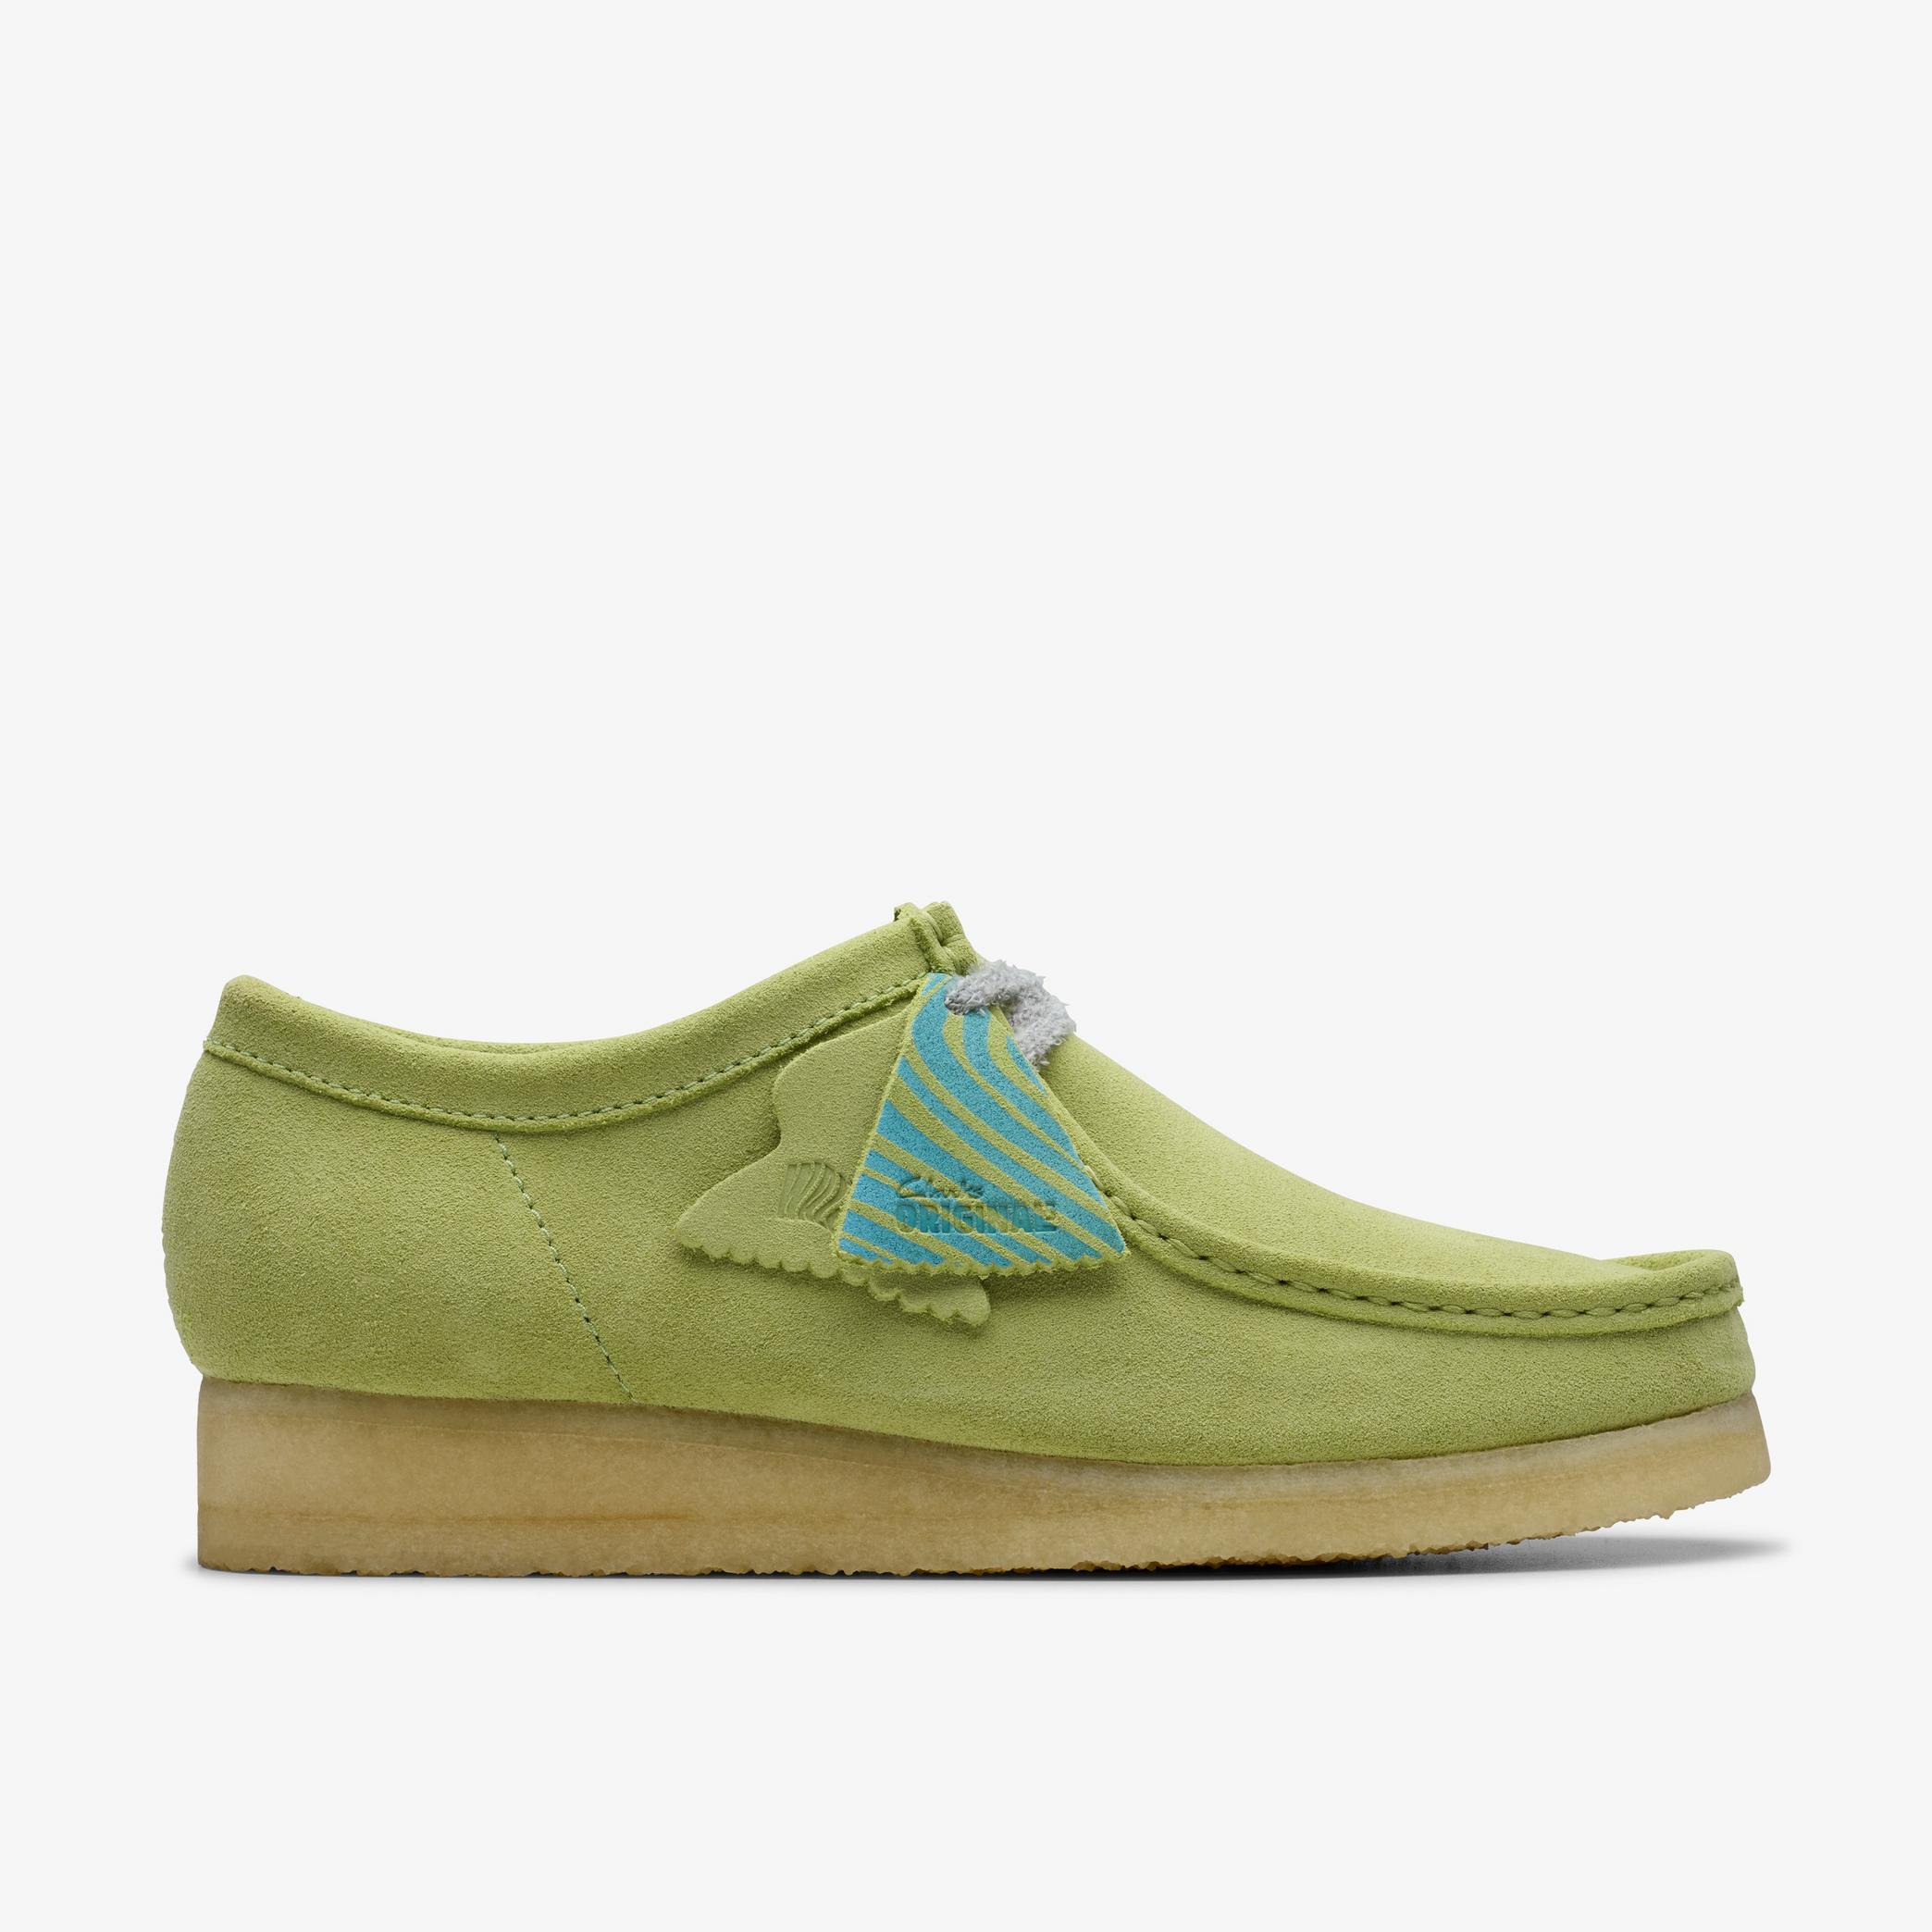 Wallabee Pale Lime Suede Wallabee, view 1 of 7